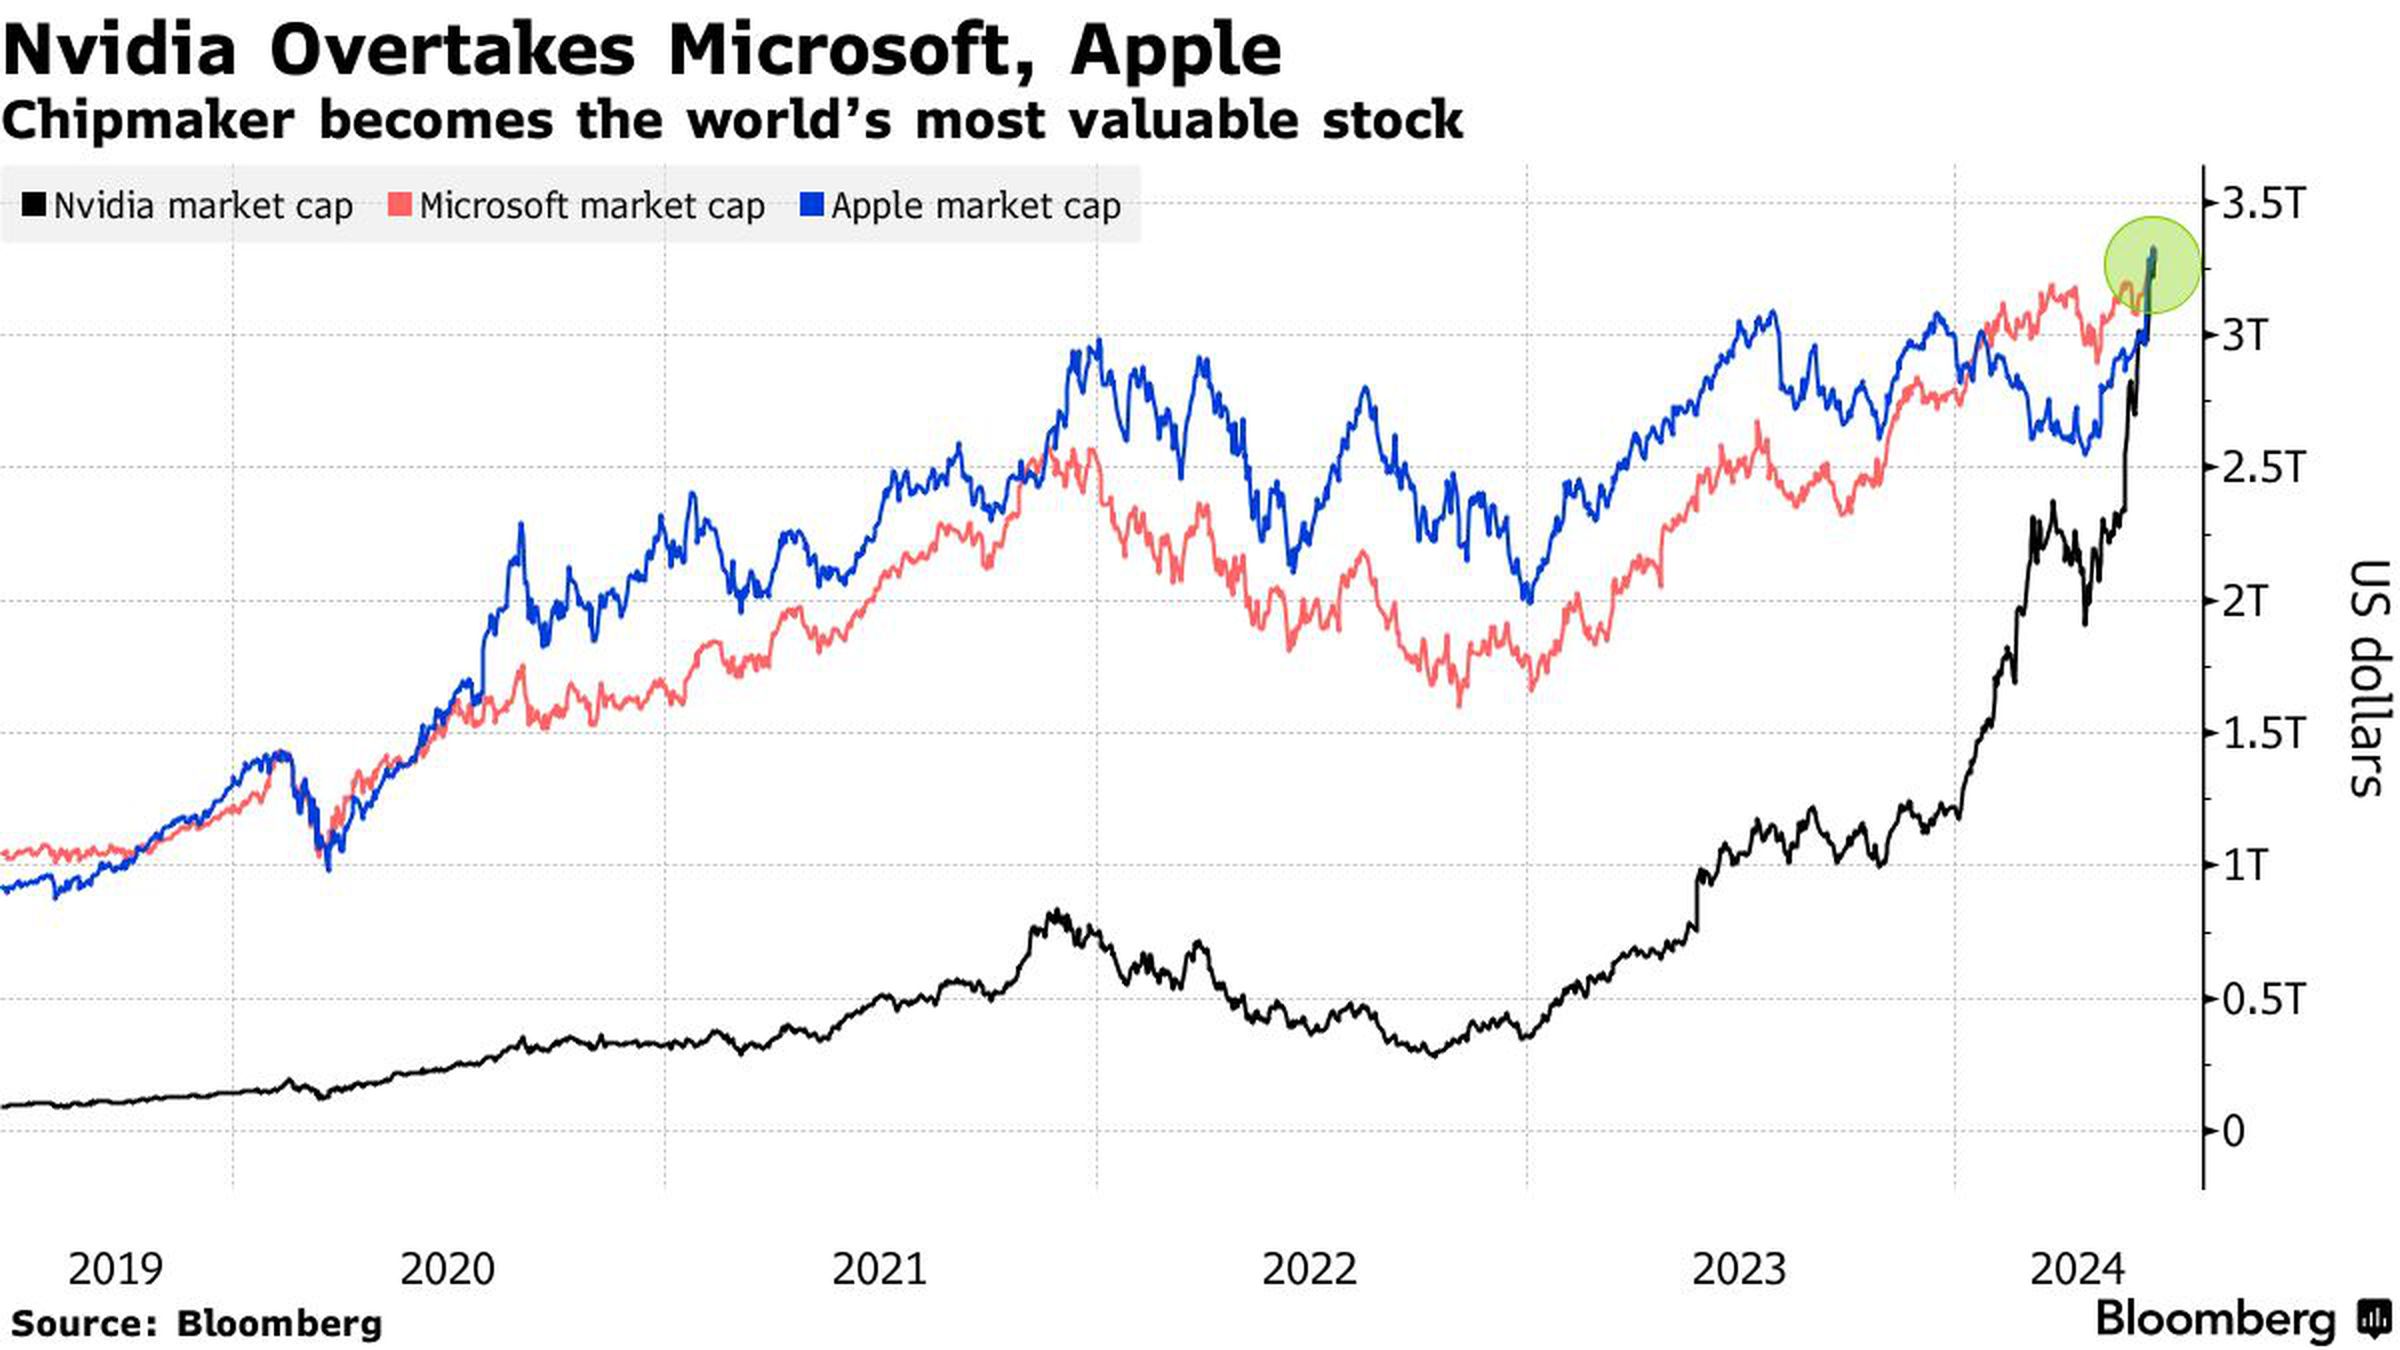 Graph showing the market cap of Apple, Microsoft, and Nvidia since 2019.